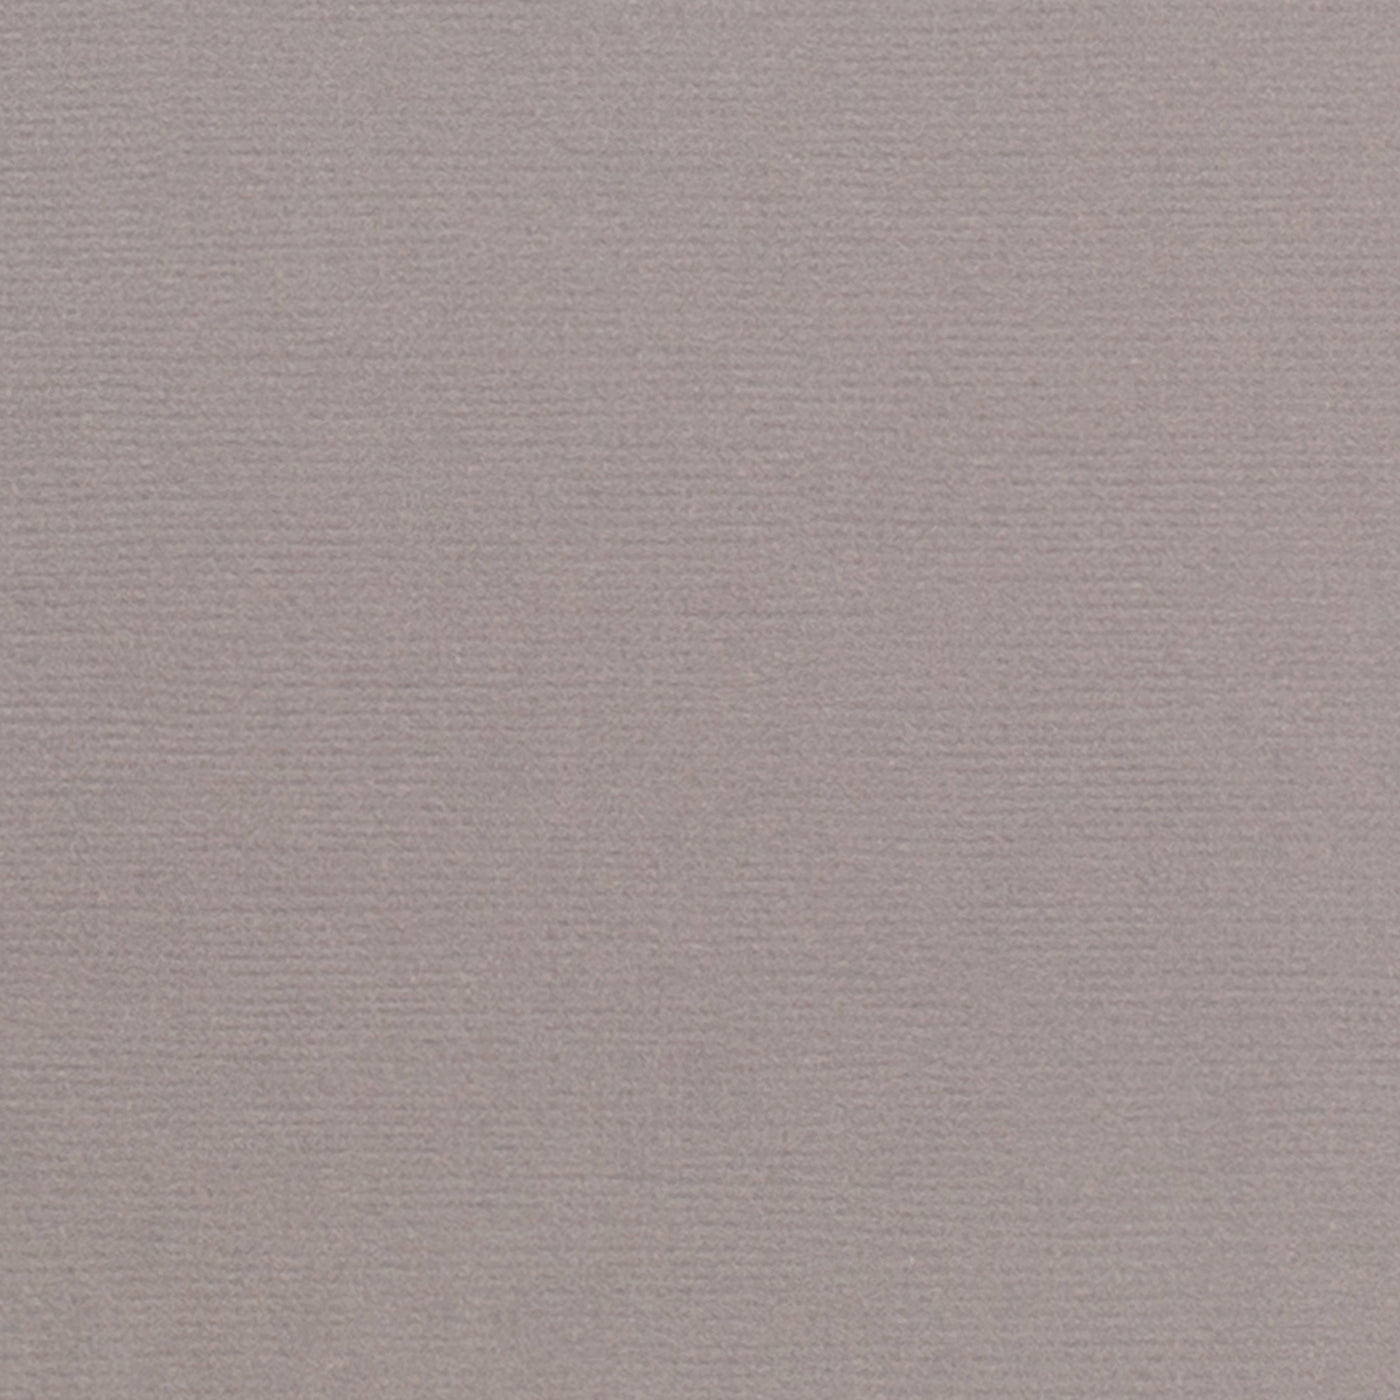 CONCRETE gray cardstock from American Crafts - 12x12 - 80 lb - textured scrapbook paper